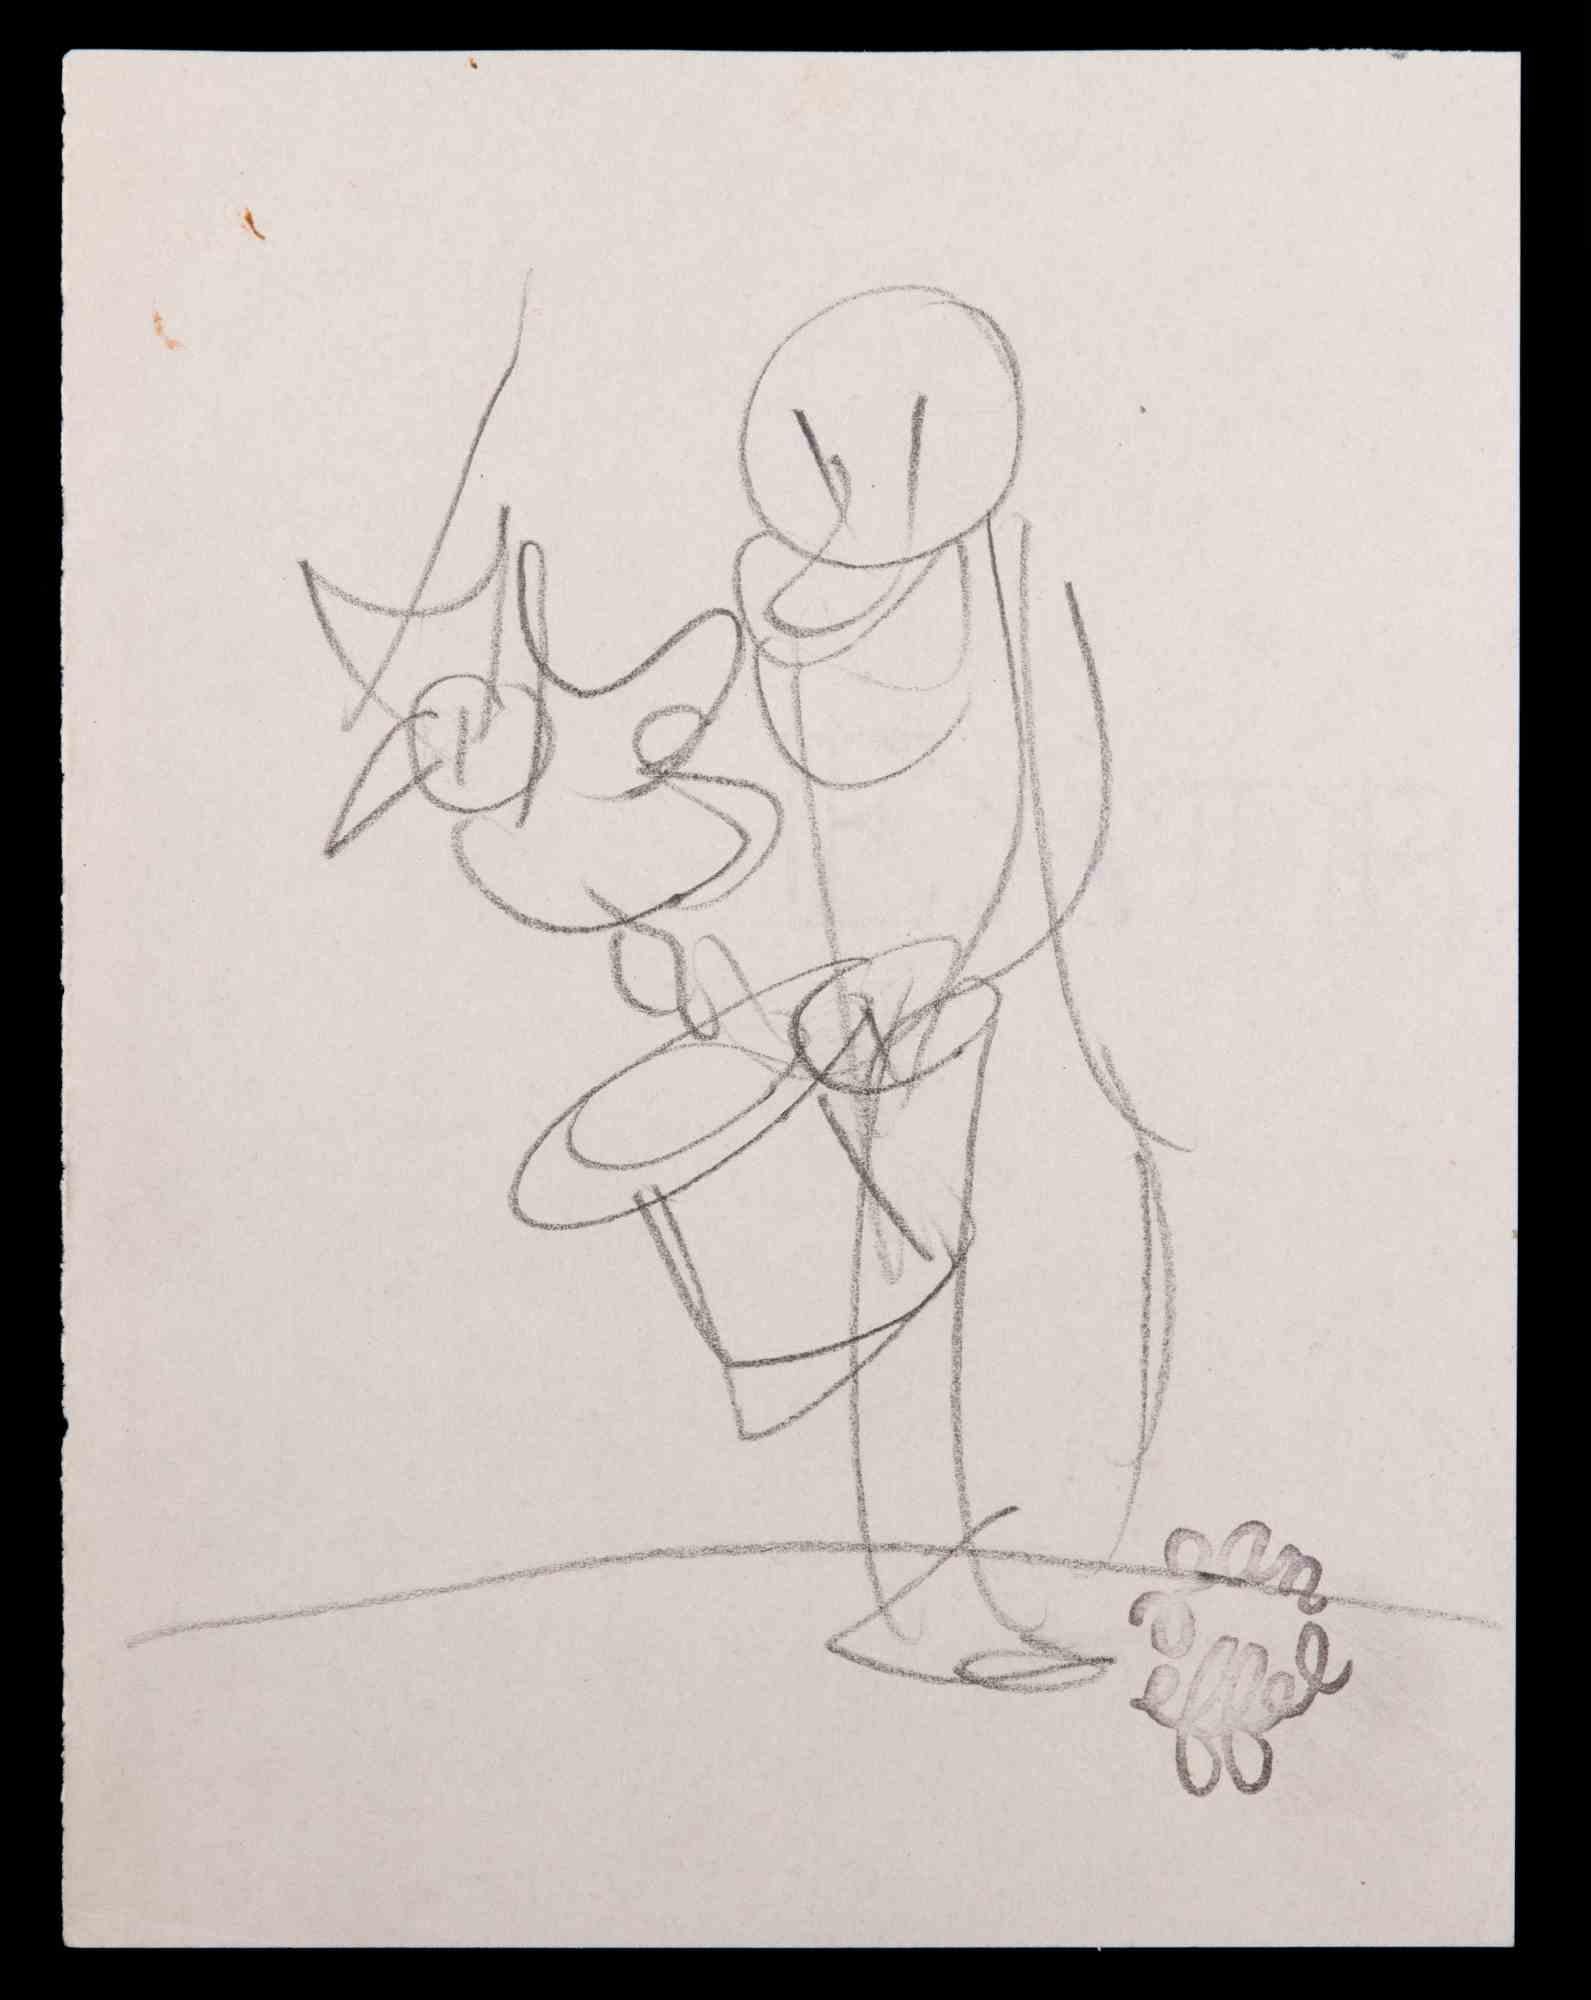 The Magician is an original drawing pencil on paper realized by Jean Effel (1908-1982) in the mid-20th Century. Stamp signed on the lower right.

The Person is depicted through a harmonious style.

Good conditions.